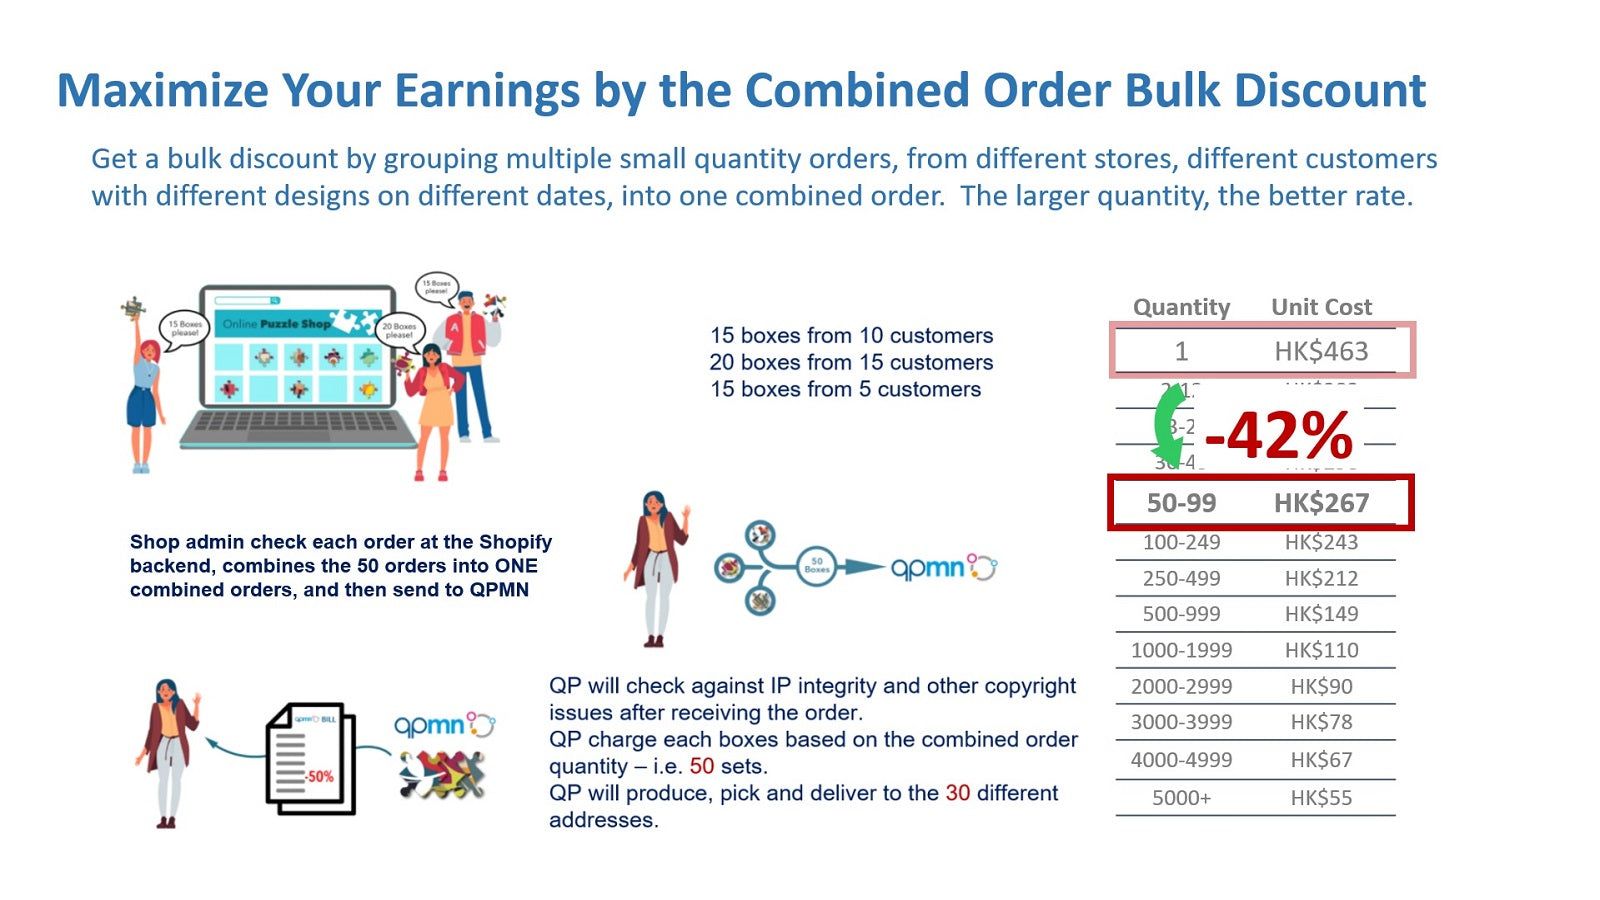 Maximize Your Earnings by the Combined Order Bulk Discount